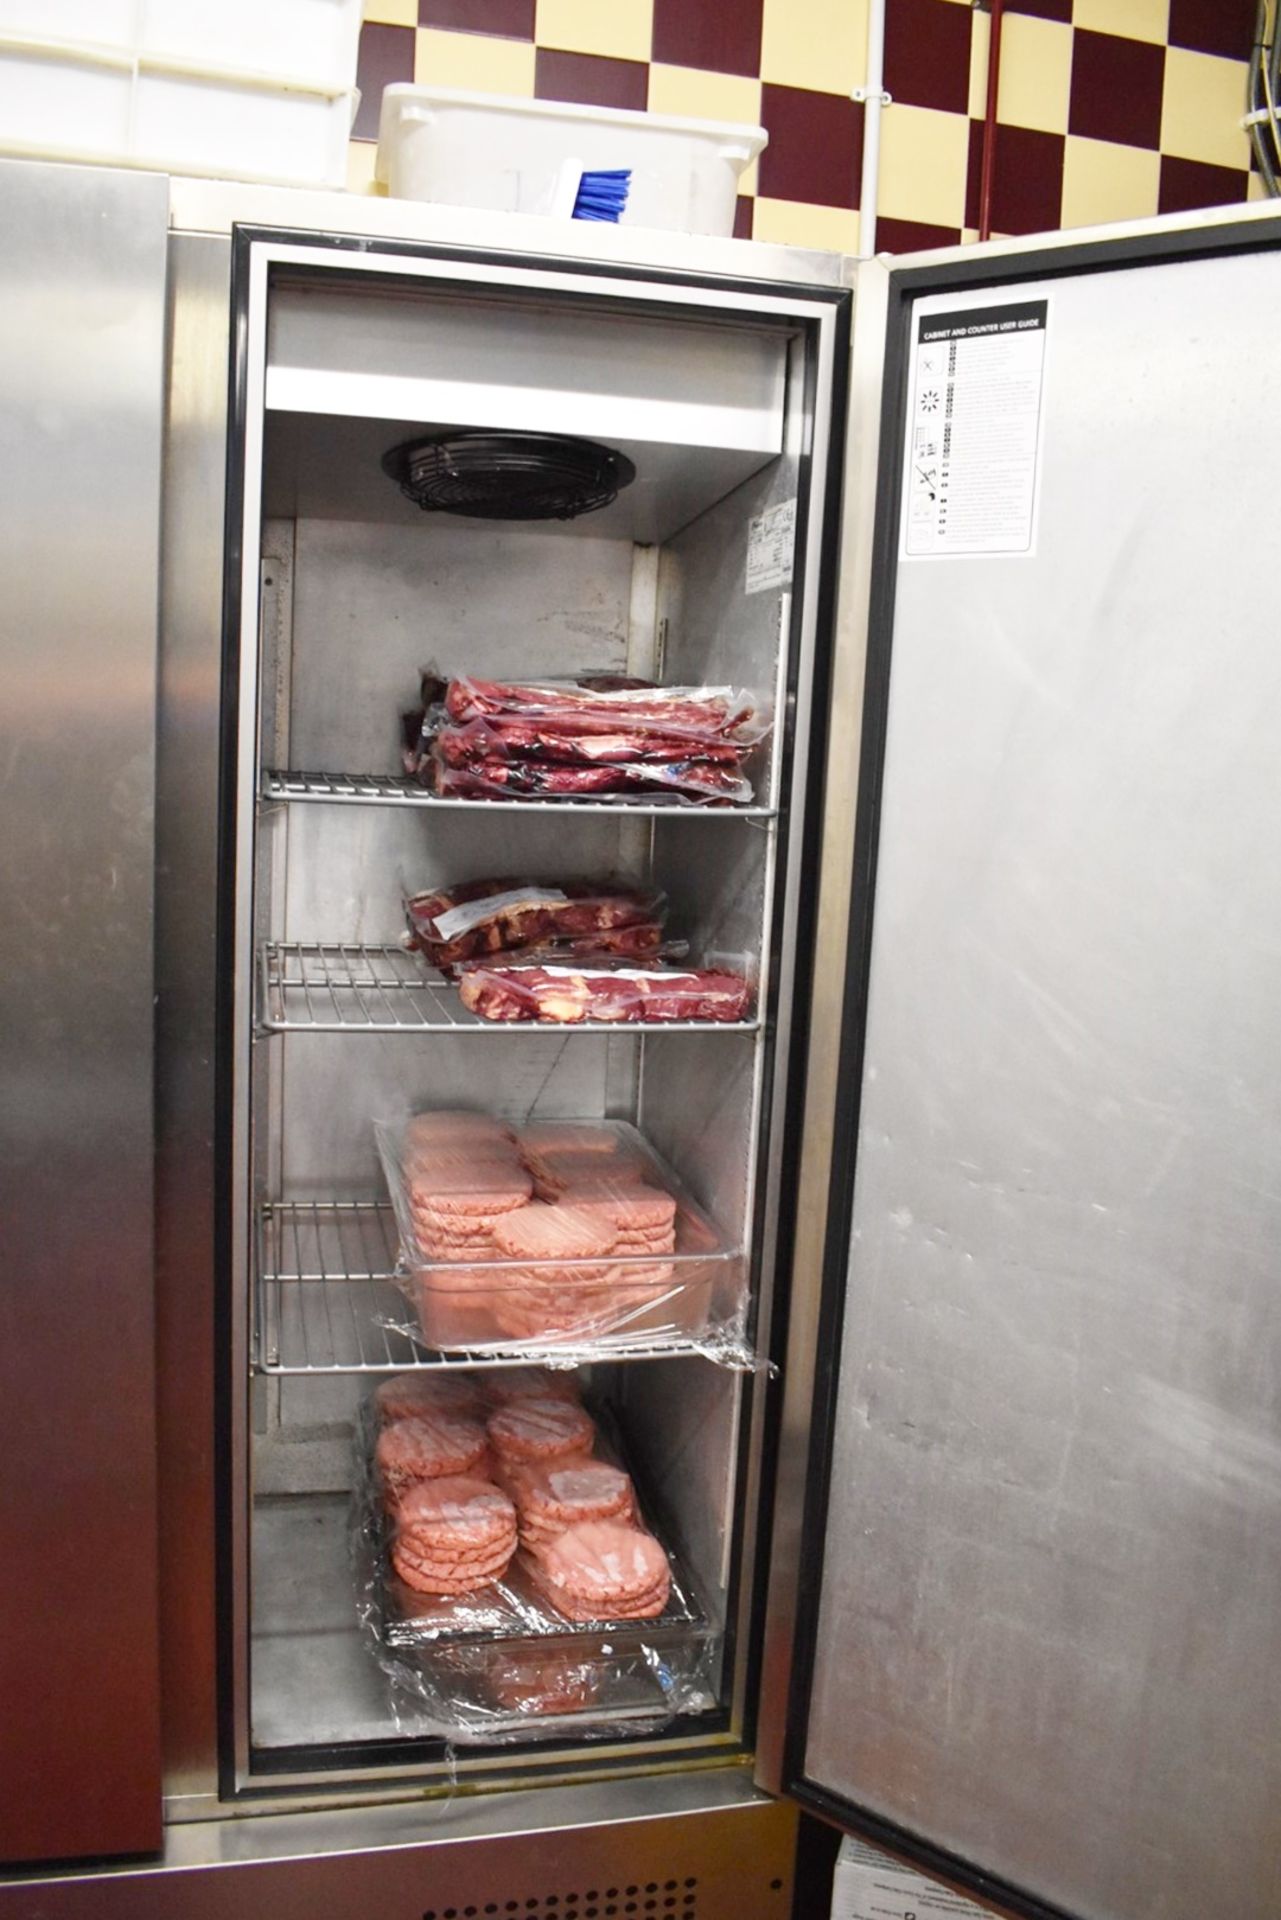 1 x Foster 800 Litre Double Door Meat Fridge With Stainless Steel Finish - Model FSL800M - H188 x - Image 3 of 8